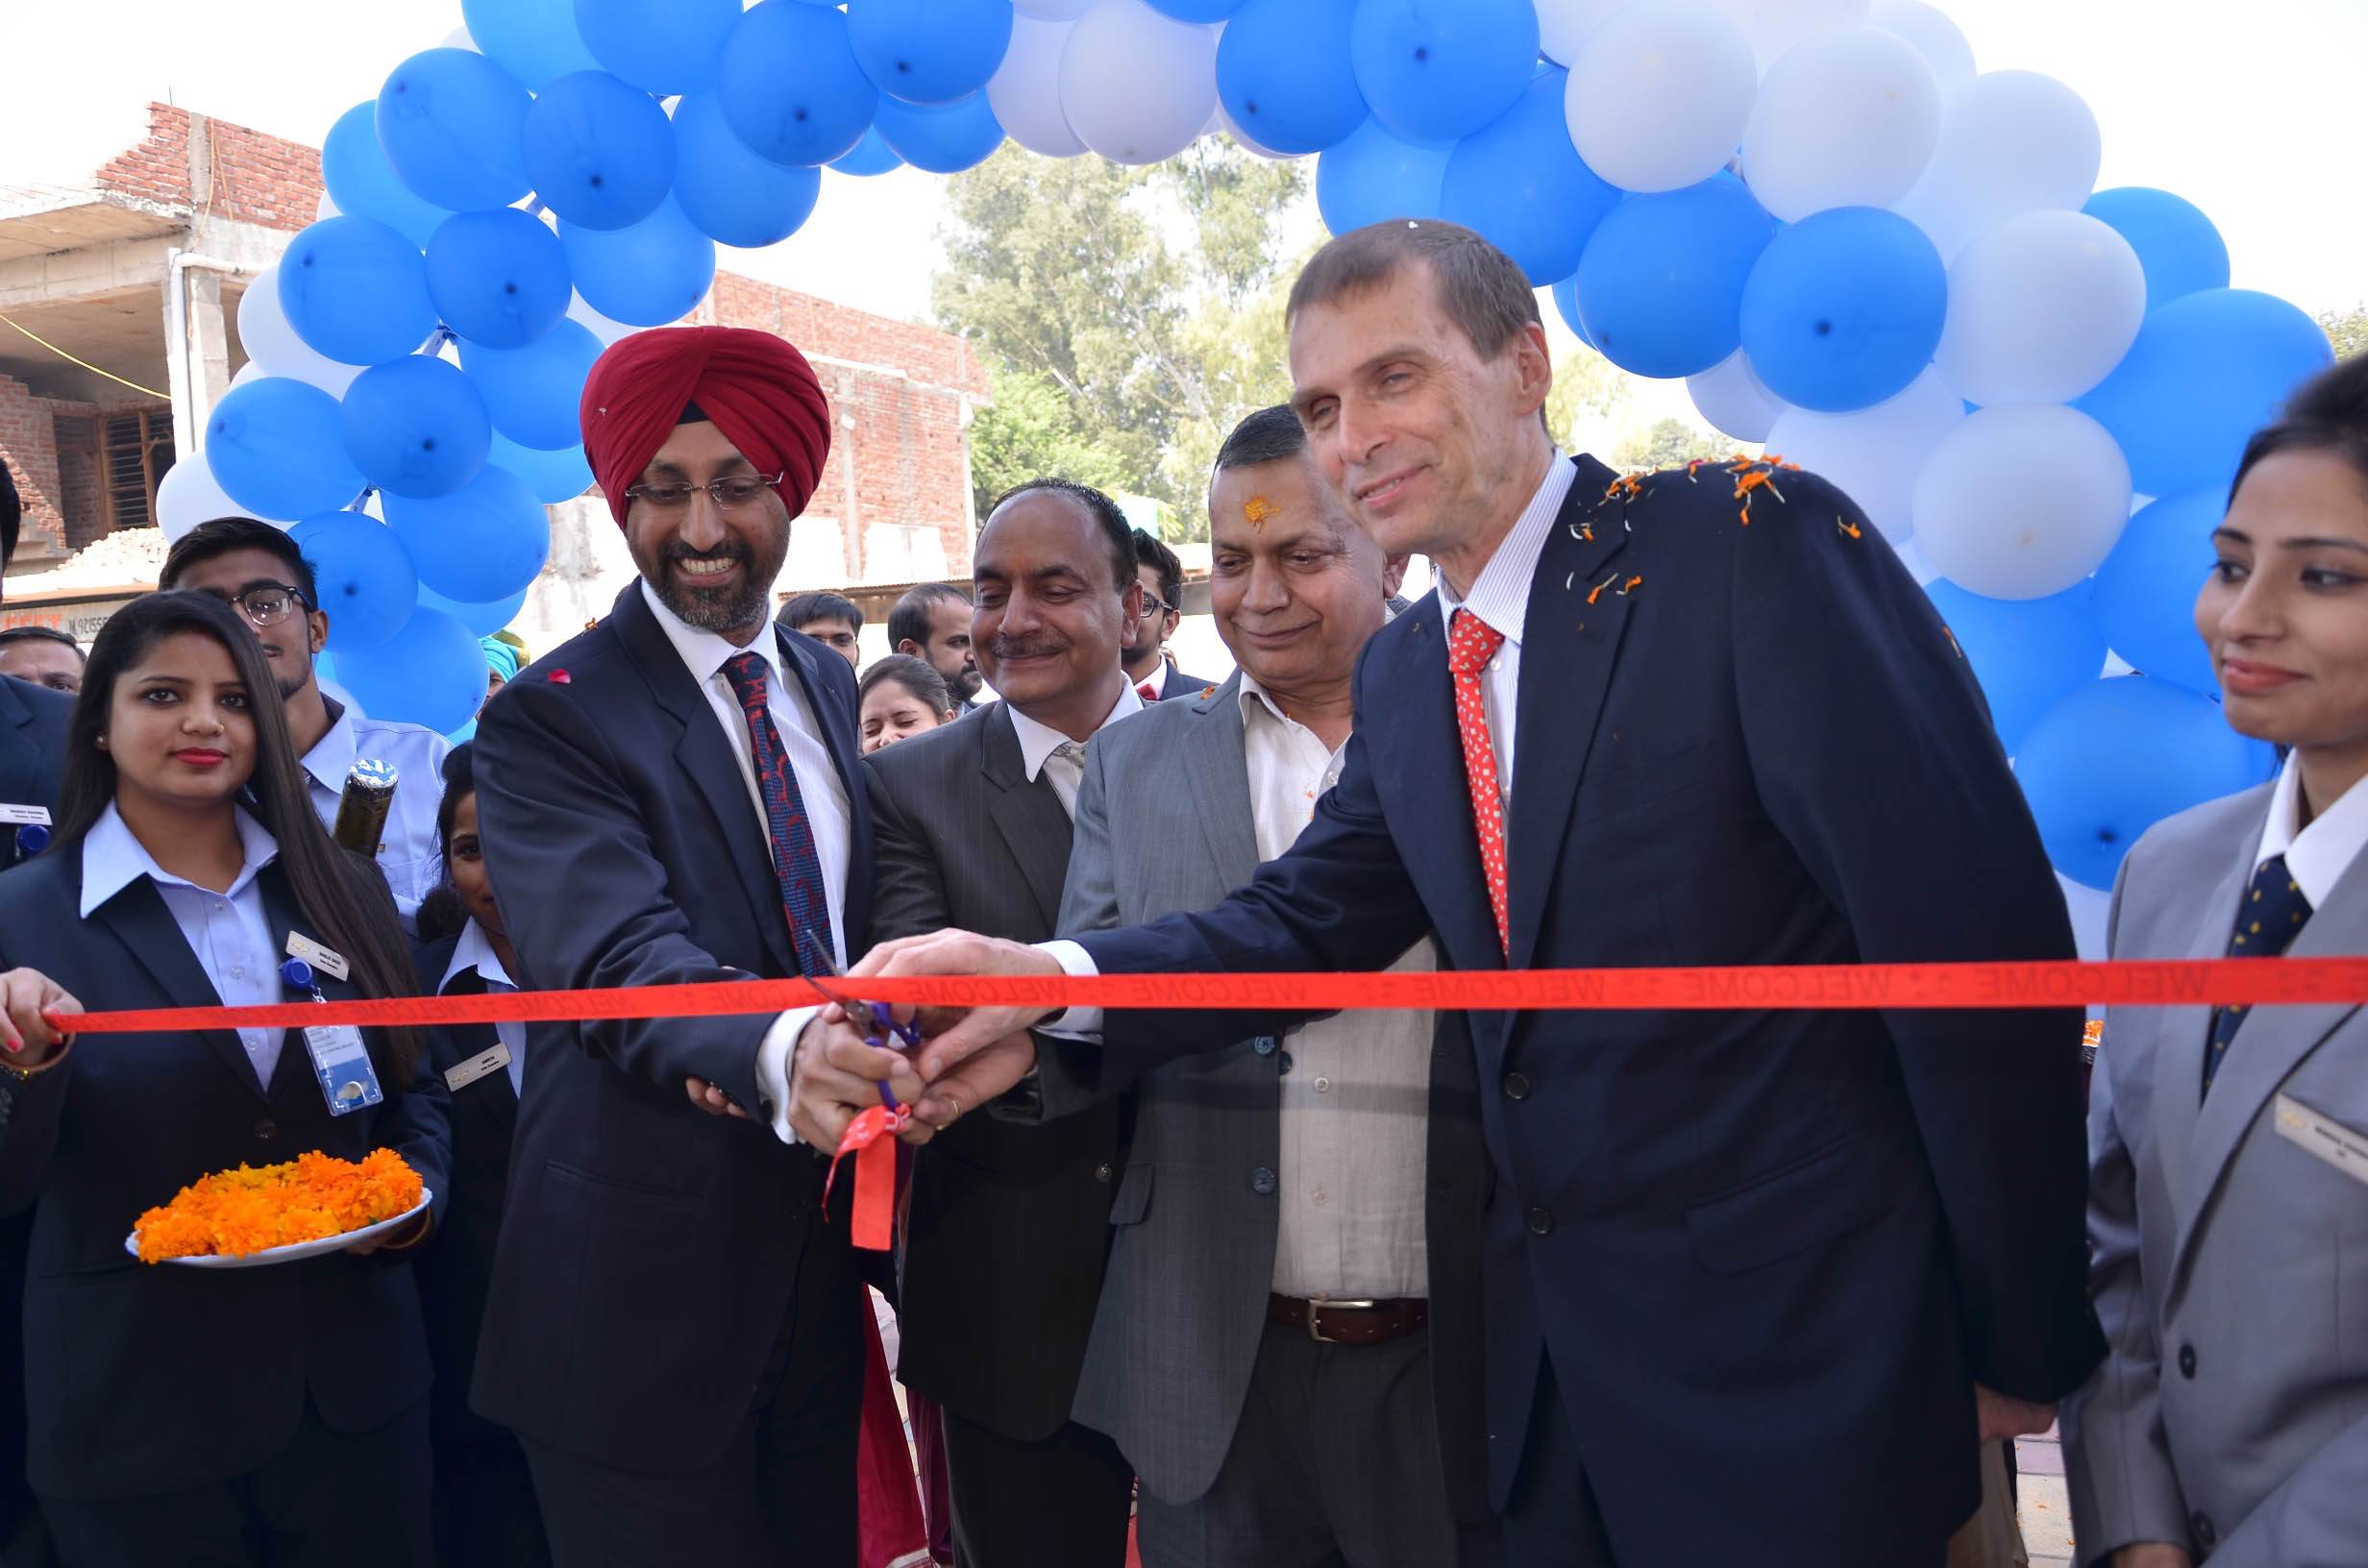 hardeep-brar-vice-president-of-sales-at-gm-india-and-markus-sternberg-vice-president-of-aftersales-and-customer-experience-gm-india-at-the-innauguration-of-ambala-automobiles-1